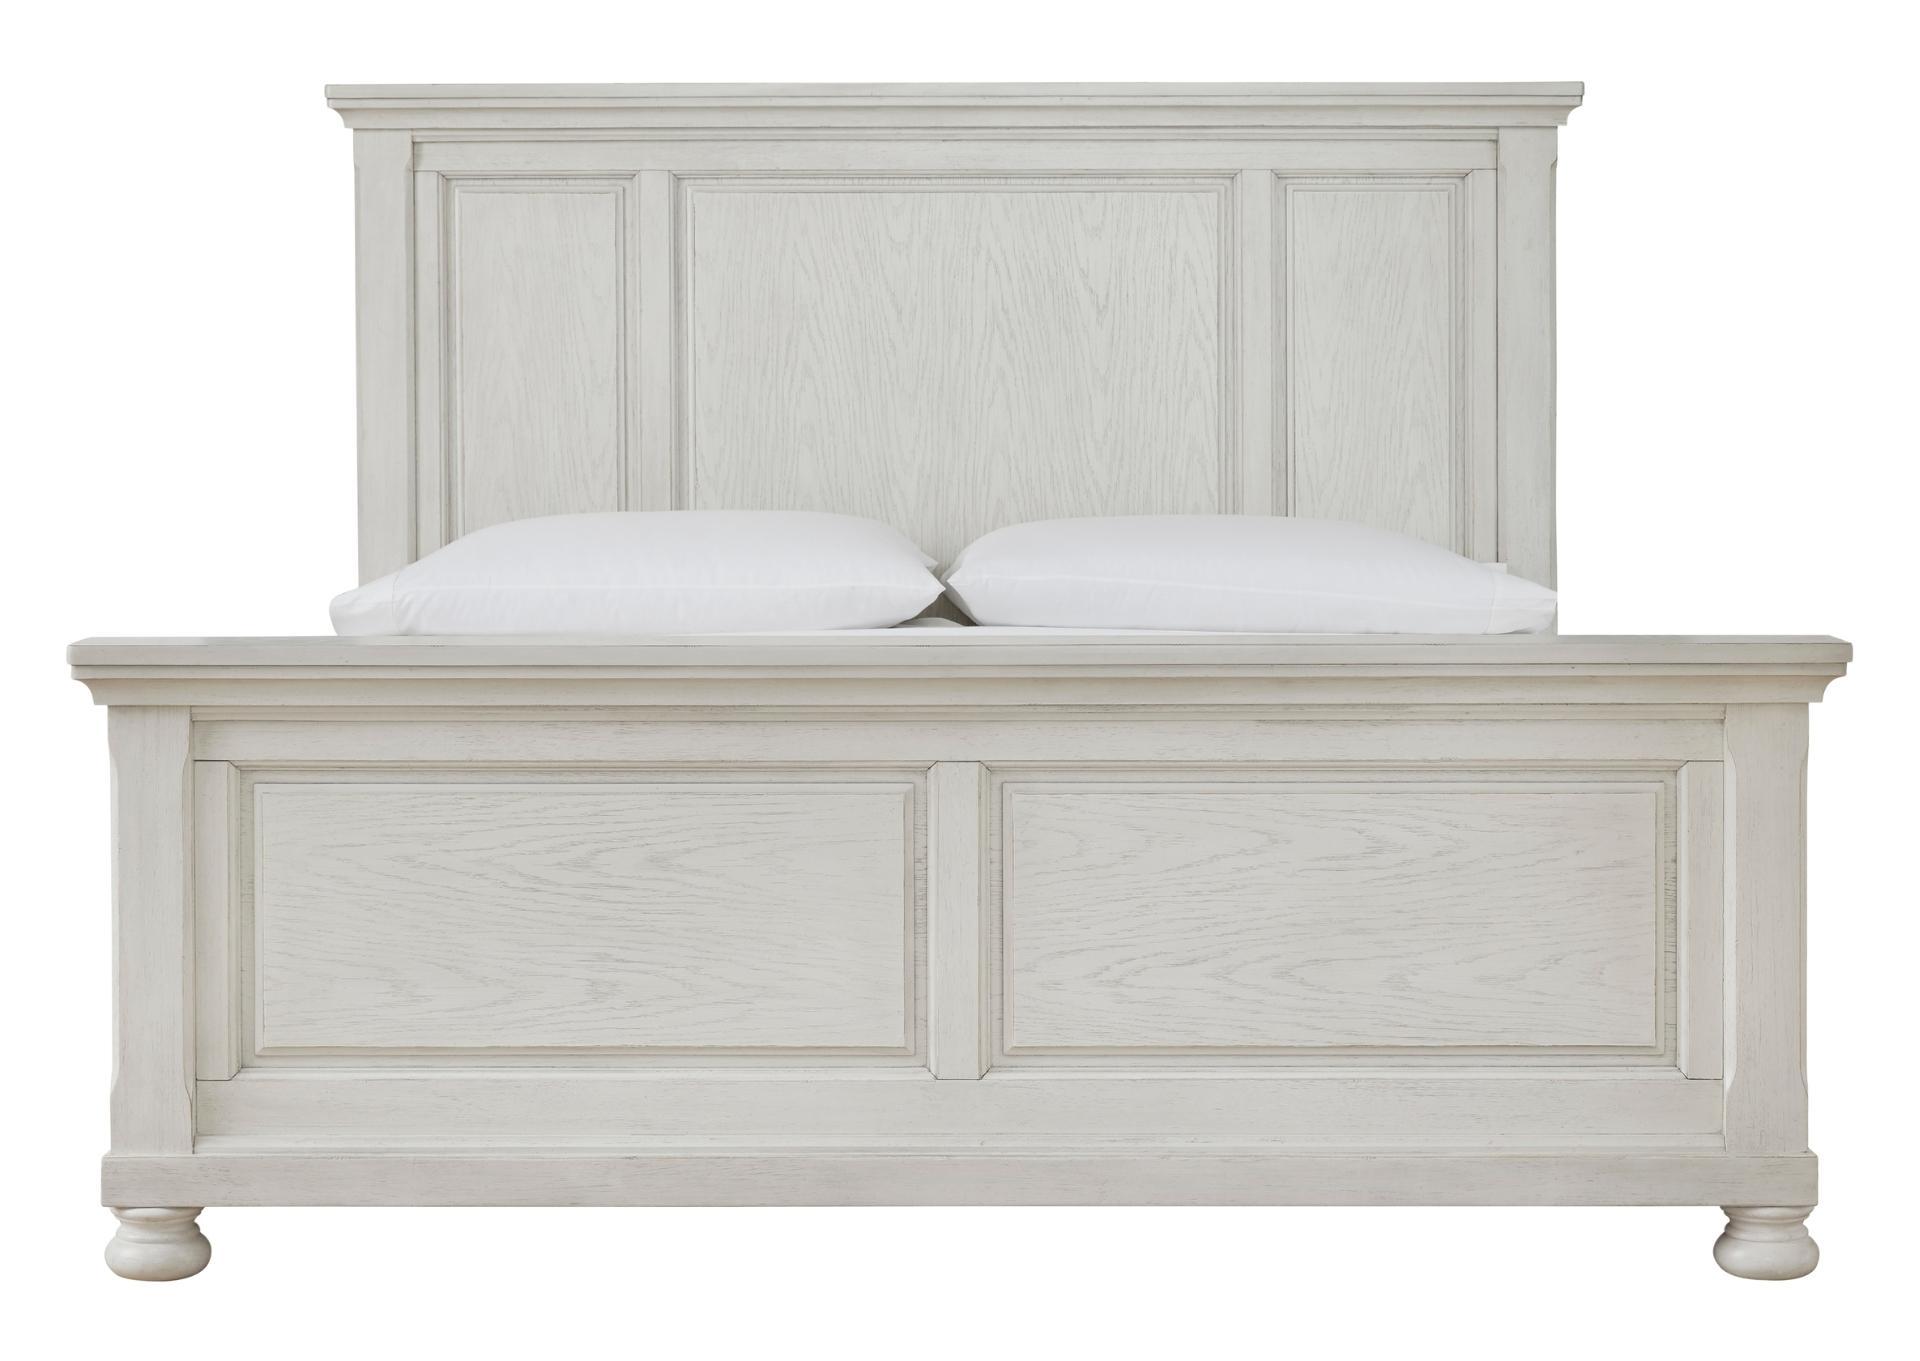 ROBBINSDALE QUEEN PANEL BED